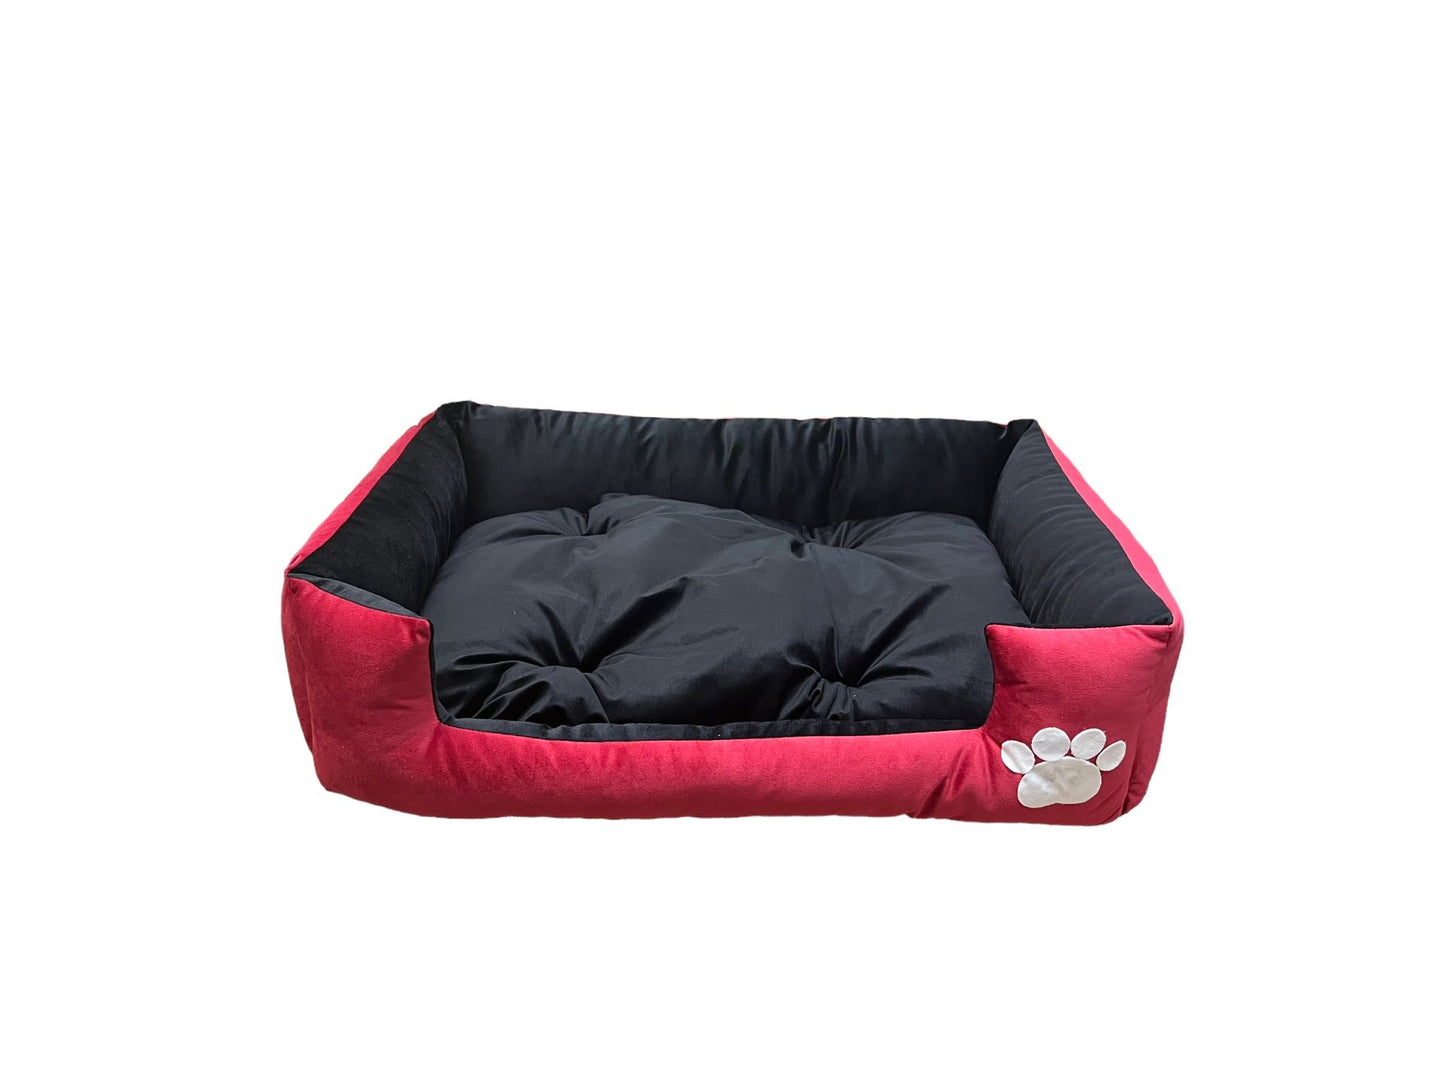 Comfy paw pet bed - For large breed dogs